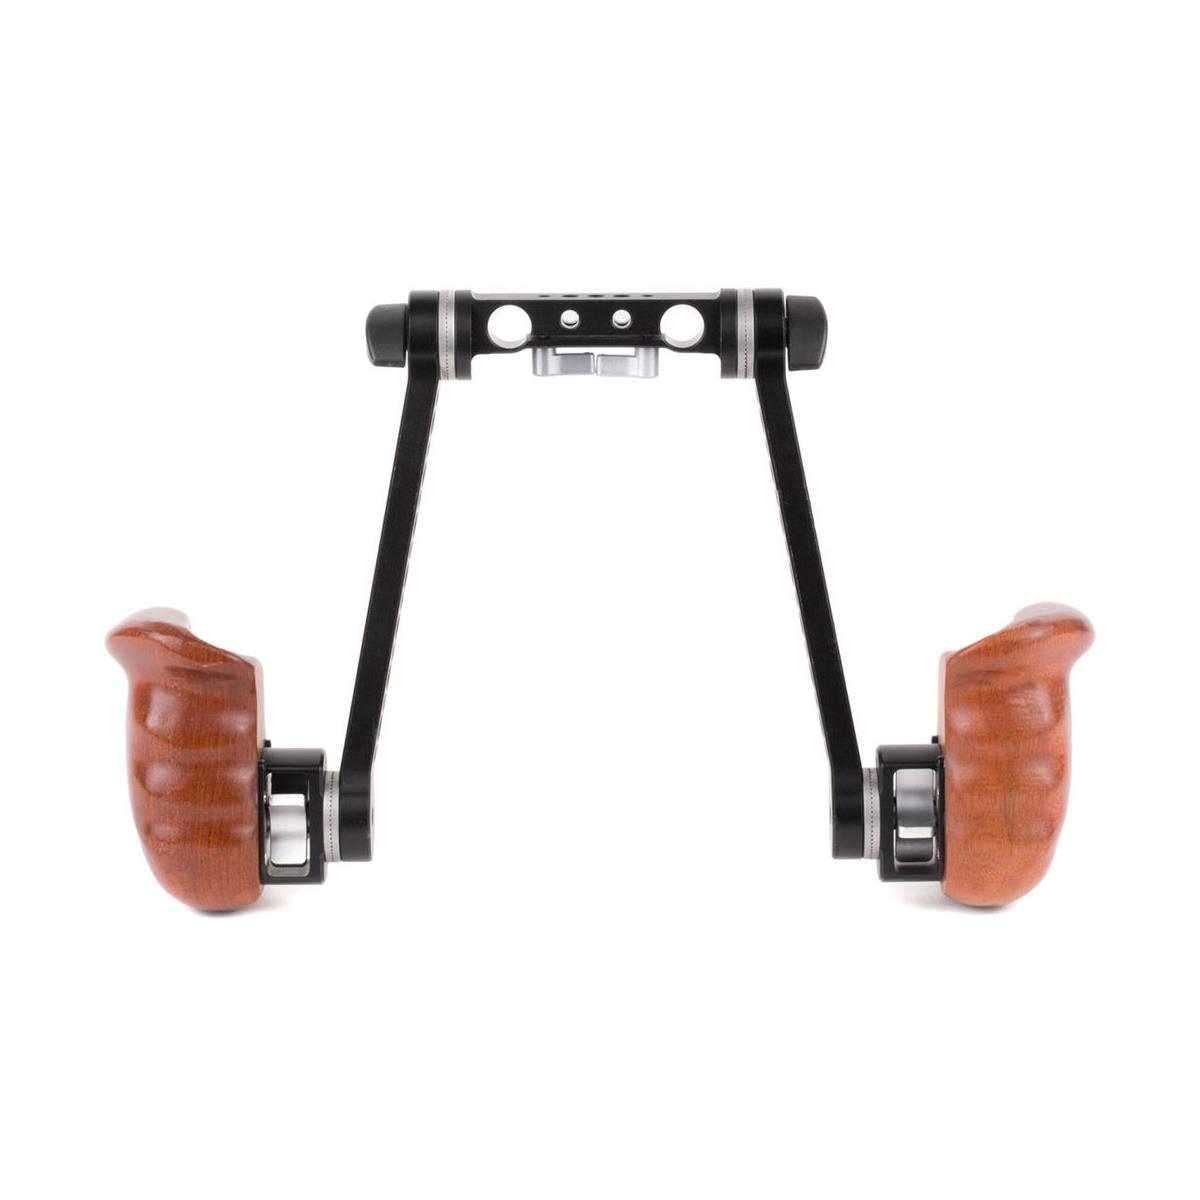 Image of Wooden Camera Rosette Handle Kit with Wood Grip